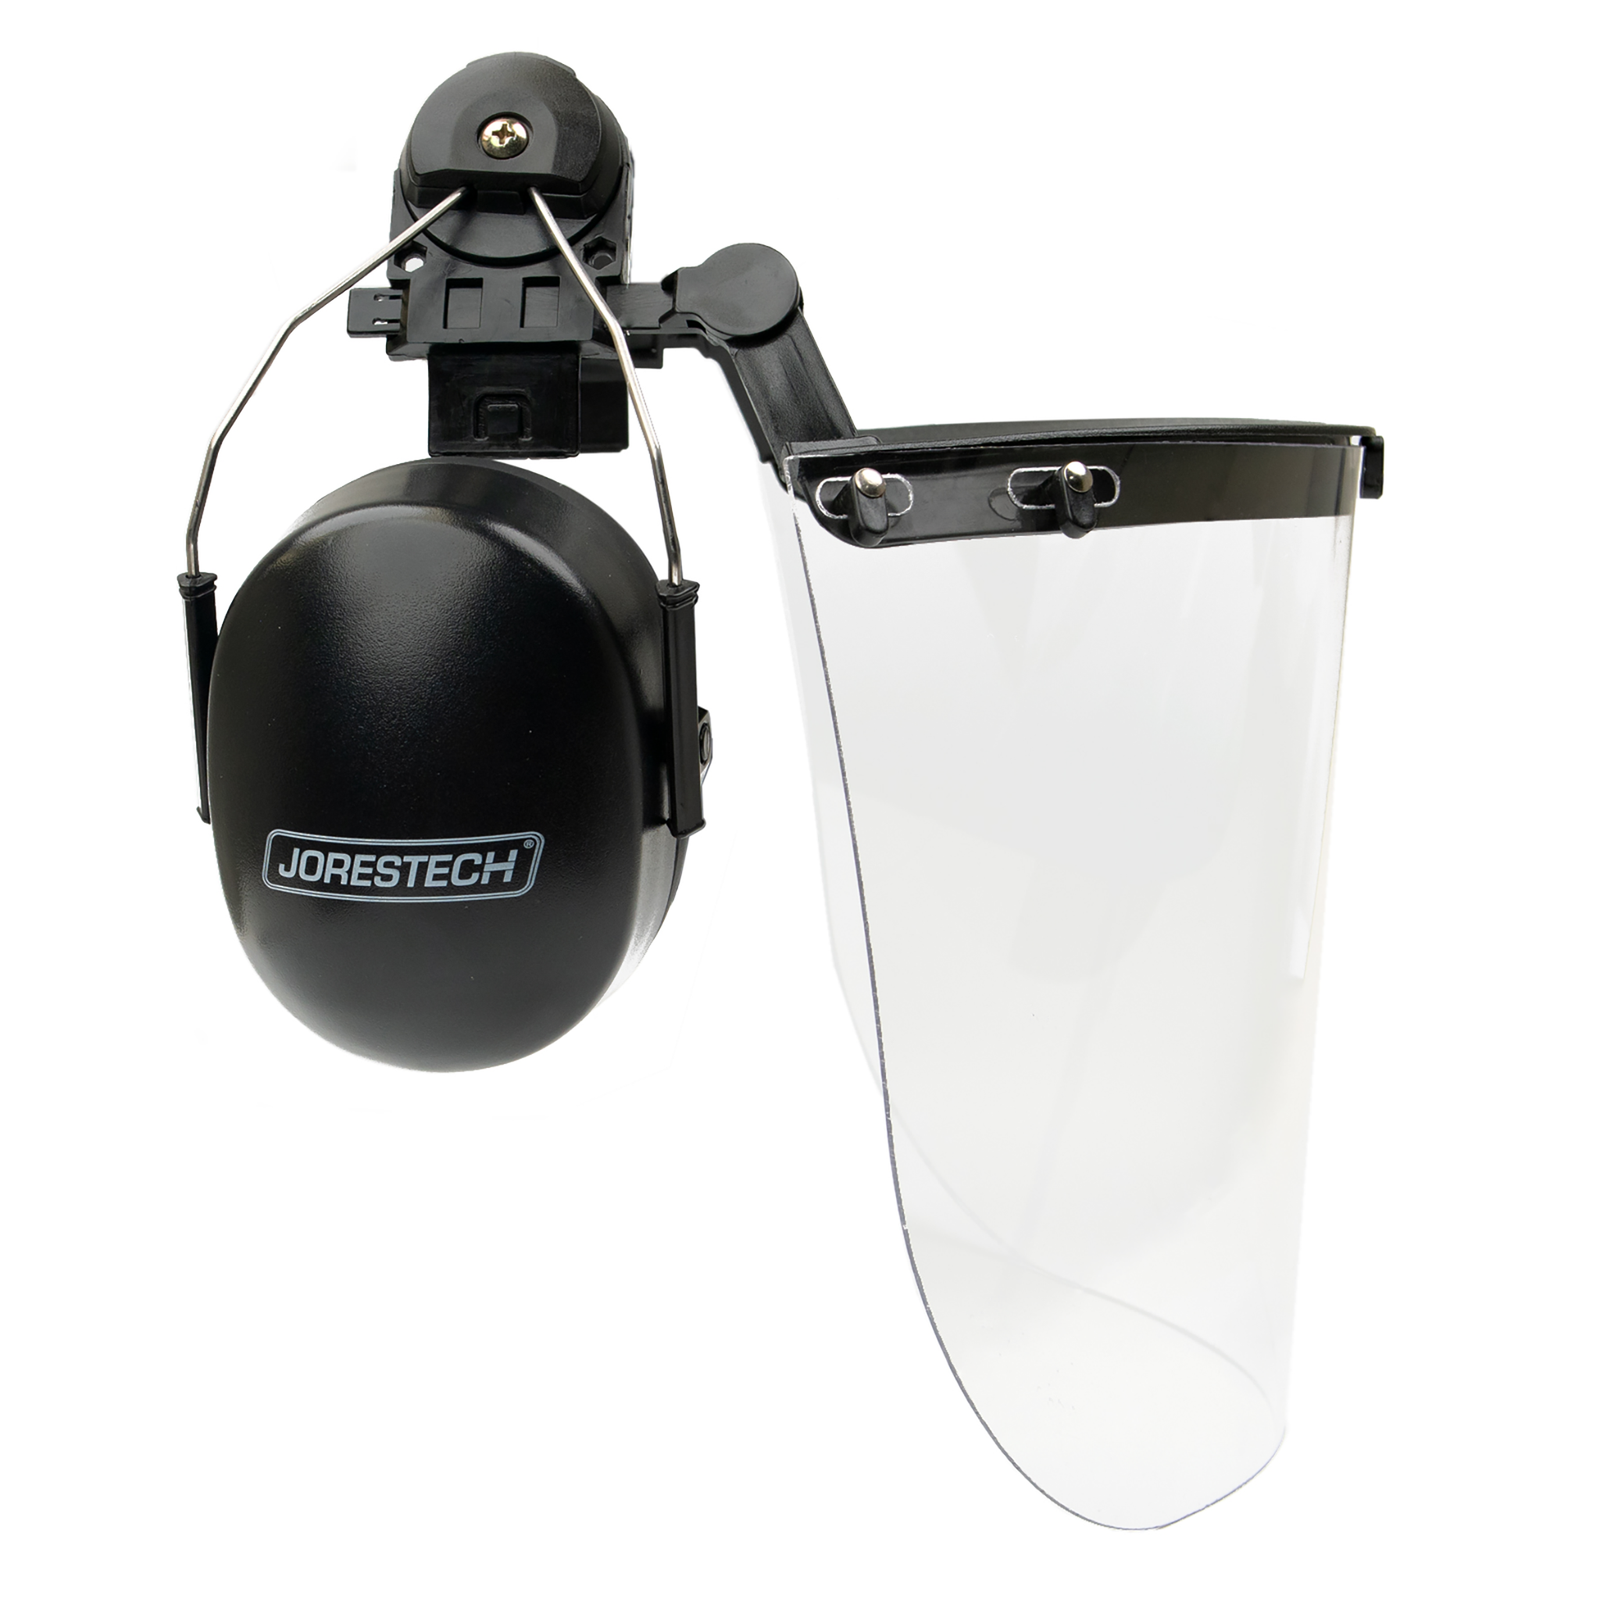 Plastic shield and earmuffs compatible with the jorestech hard hat